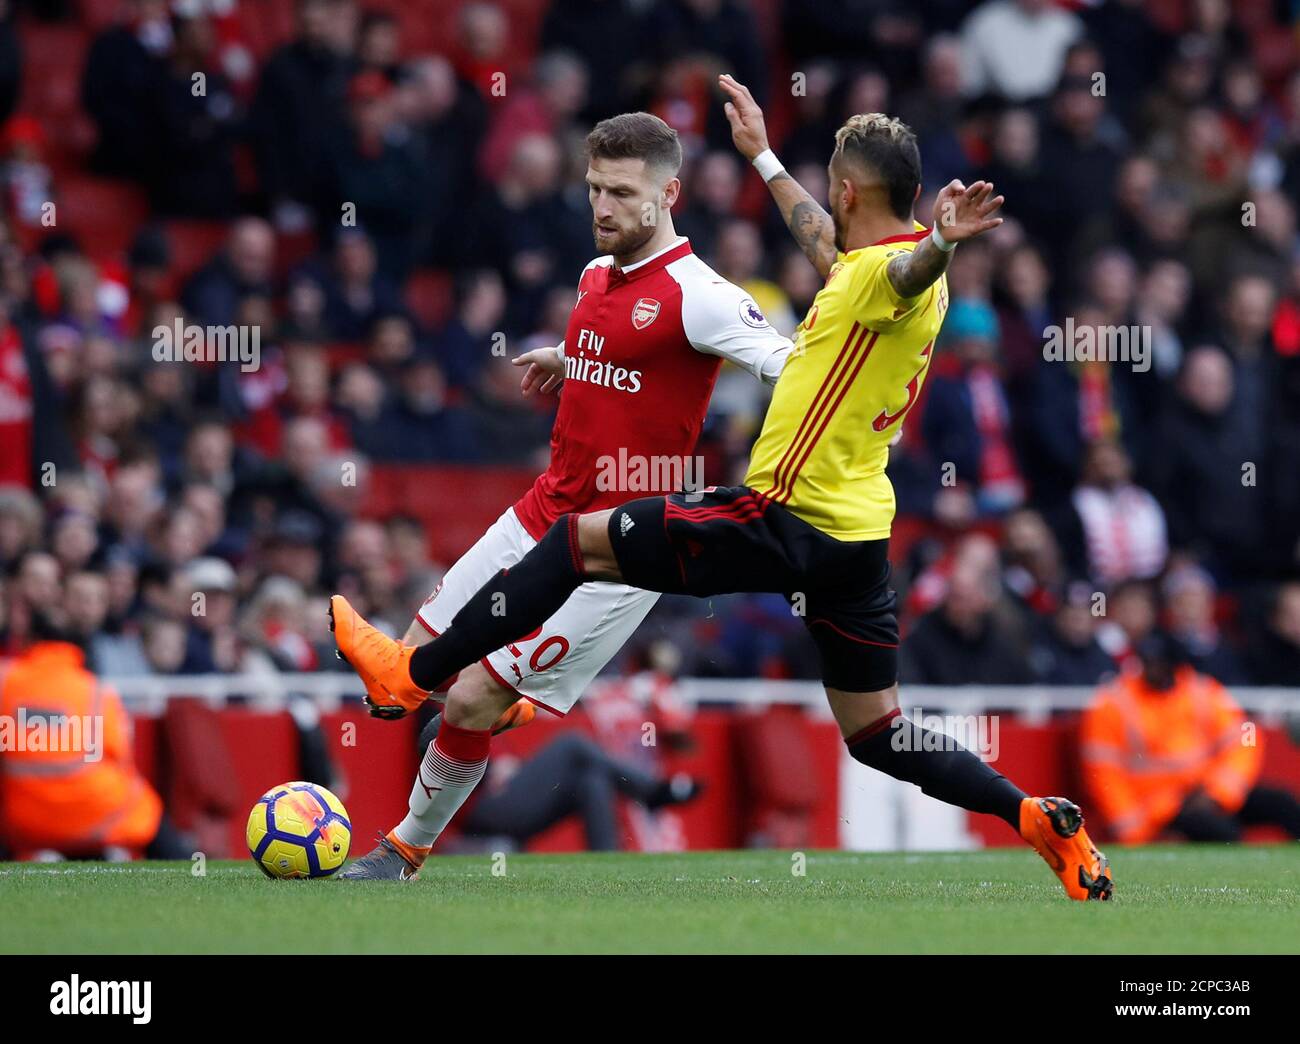 Soccer Football - Premier League - Arsenal vs Watford - Emirates Stadium, London, Britain - March 11, 2018   Arsenal's Shkodran Mustafi in action with Watford's Roberto Pereyra     REUTERS/Eddie Keogh    EDITORIAL USE ONLY. No use with unauthorized audio, video, data, fixture lists, club/league logos or 'live' services. Online in-match use limited to 75 images, no video emulation. No use in betting, games or single club/league/player publications.  Please contact your account representative for further details. Stock Photo